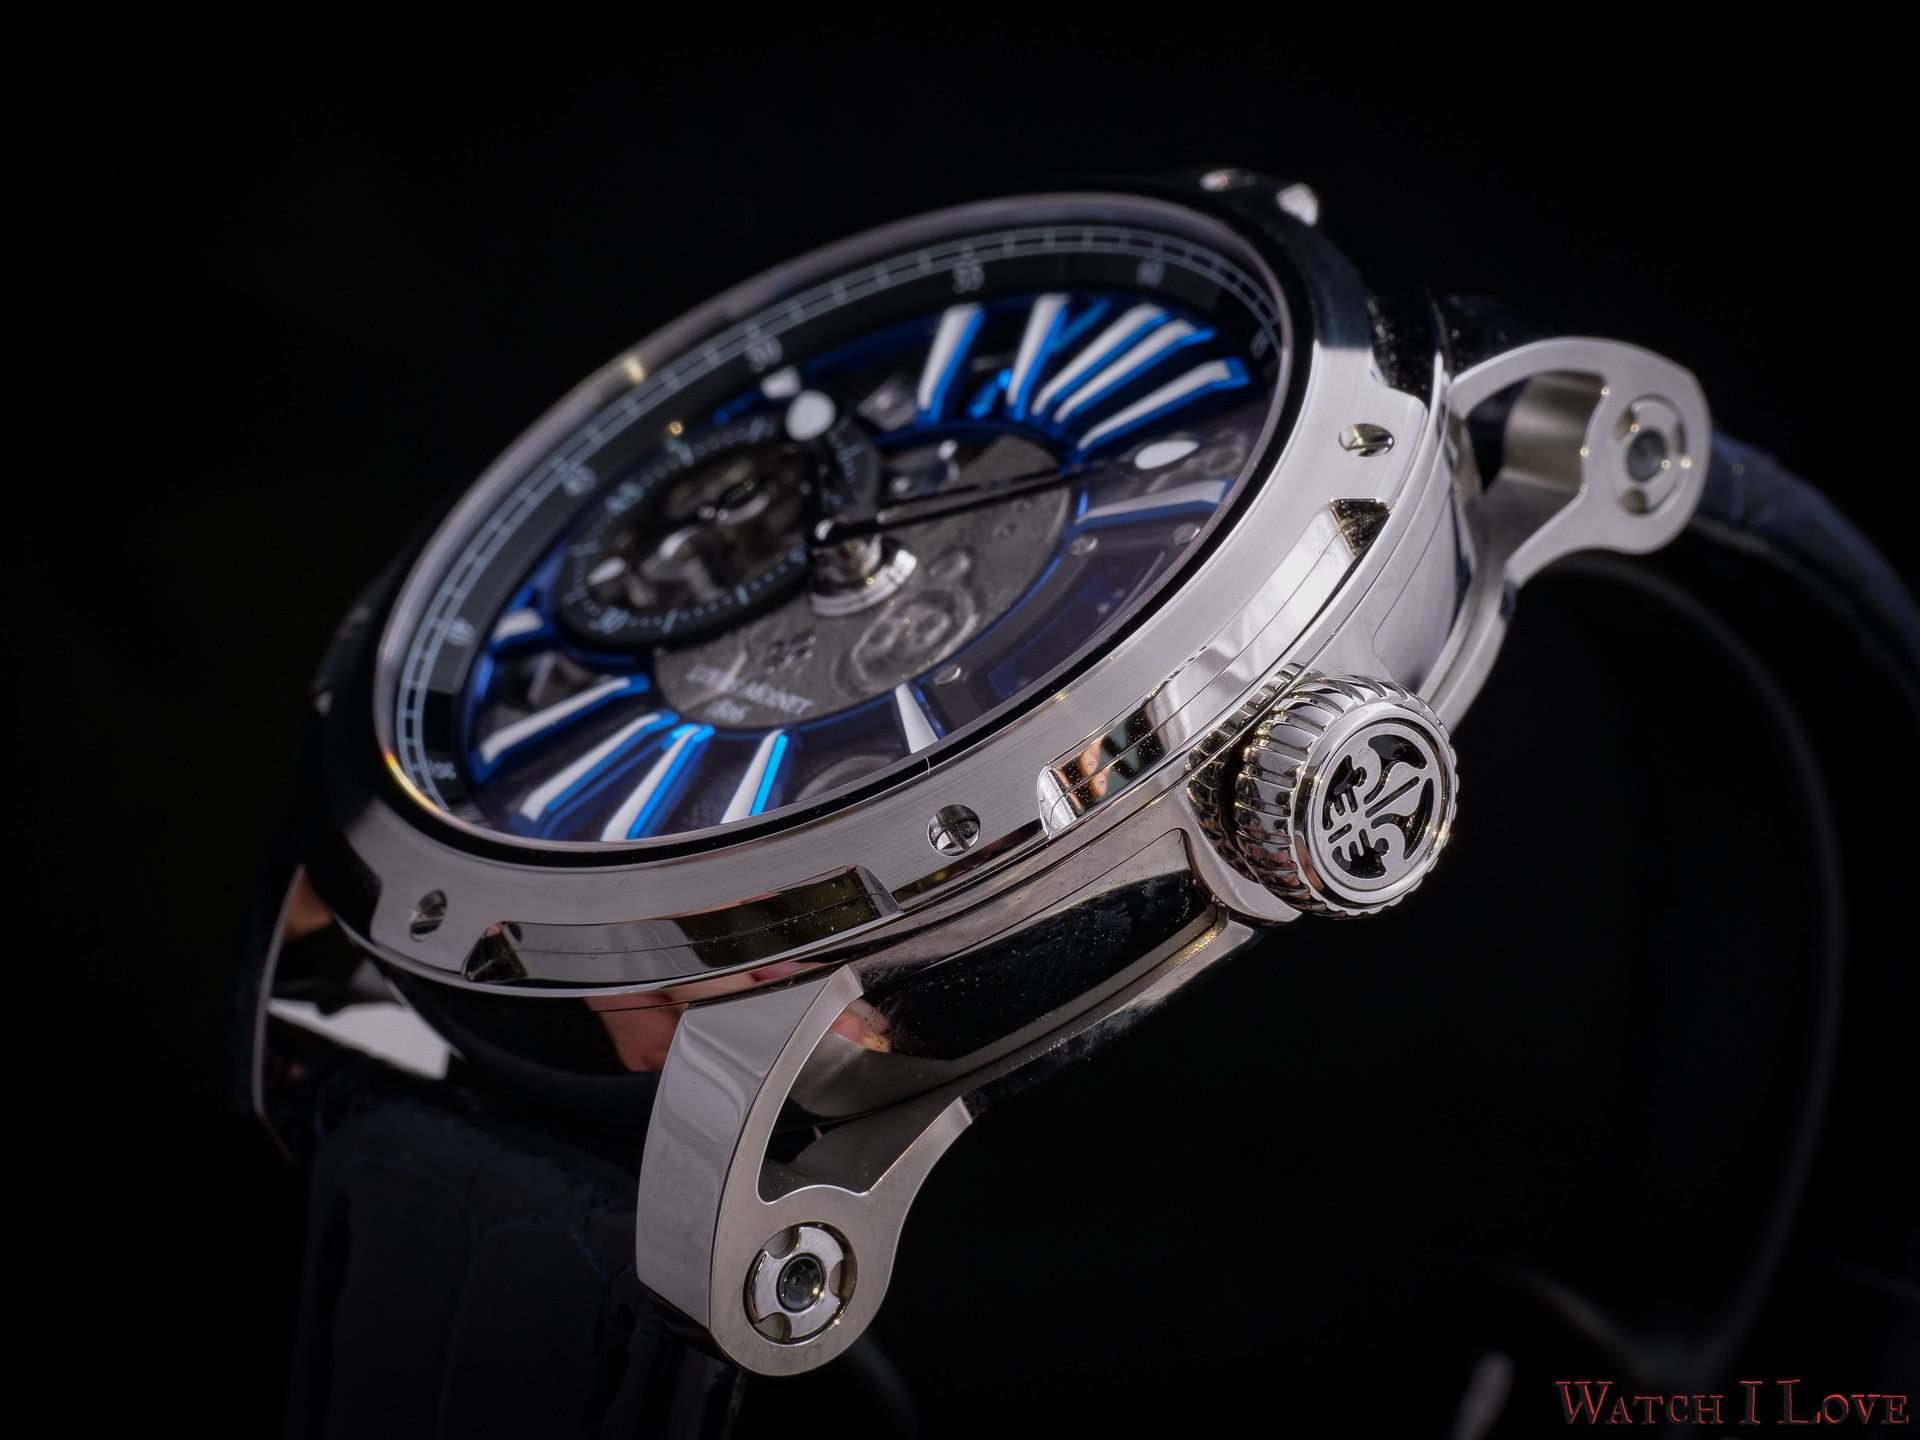 Exclusive: Introducing Louis Moinet's Blue Moon—The India-Only Edition